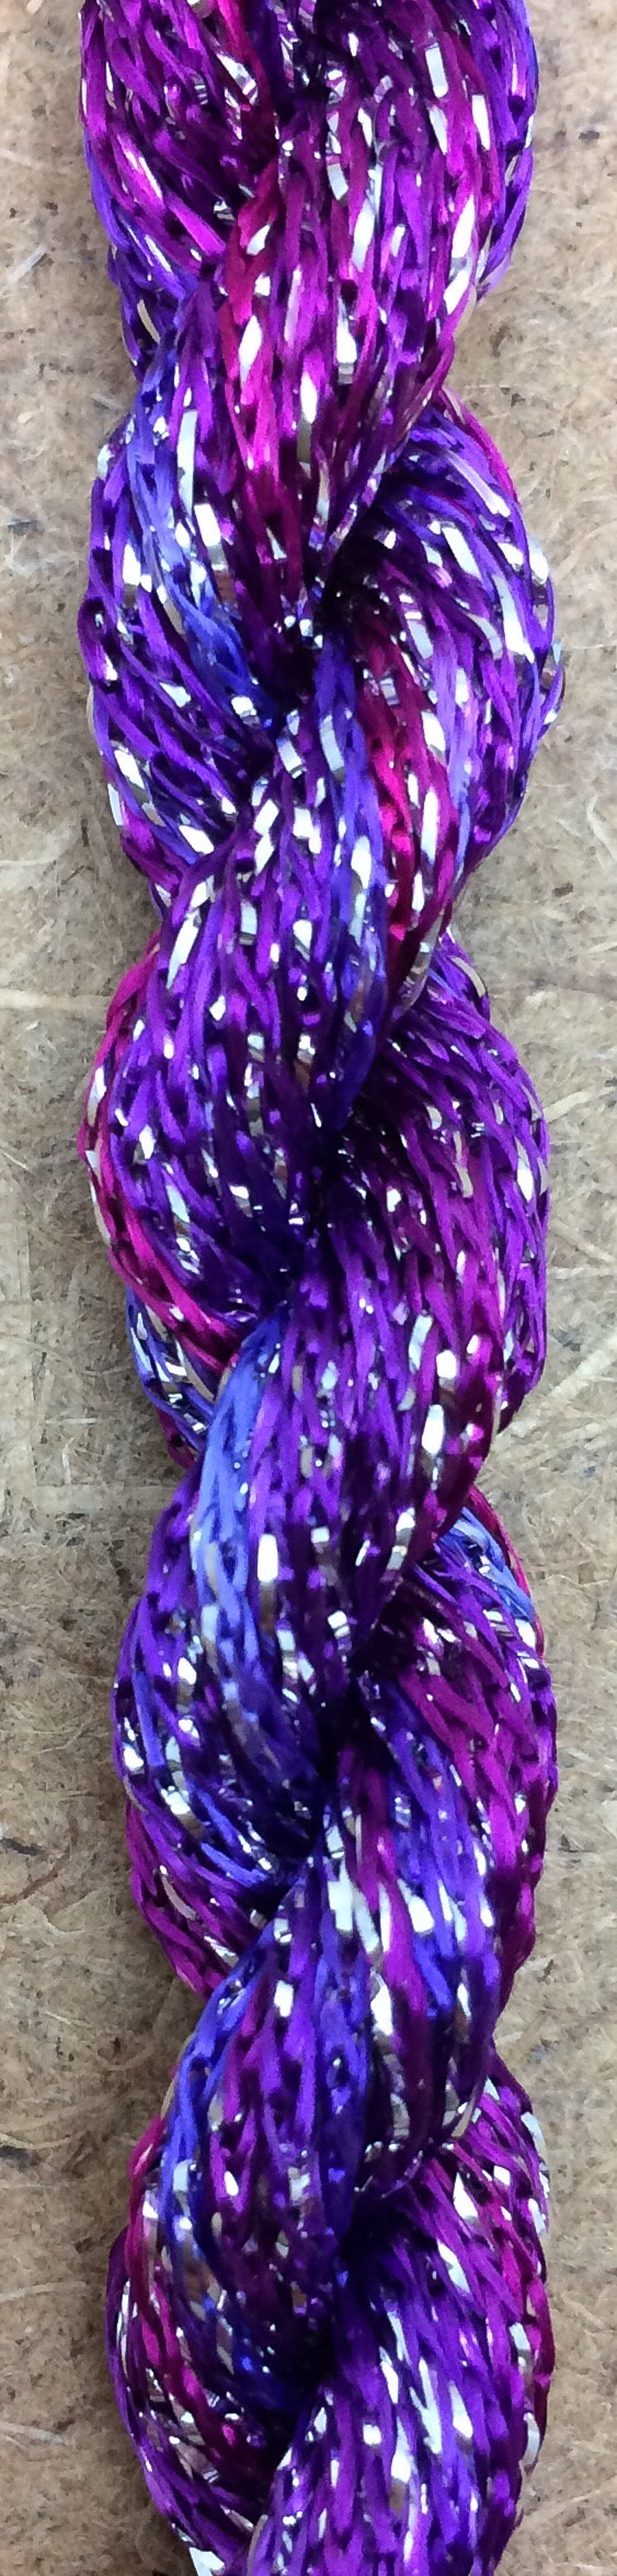 skein 10m No.05 Violet 4167 Viscose Sparkle Chainette with Silver Lurex 11 yards Embroidery Thread Floss